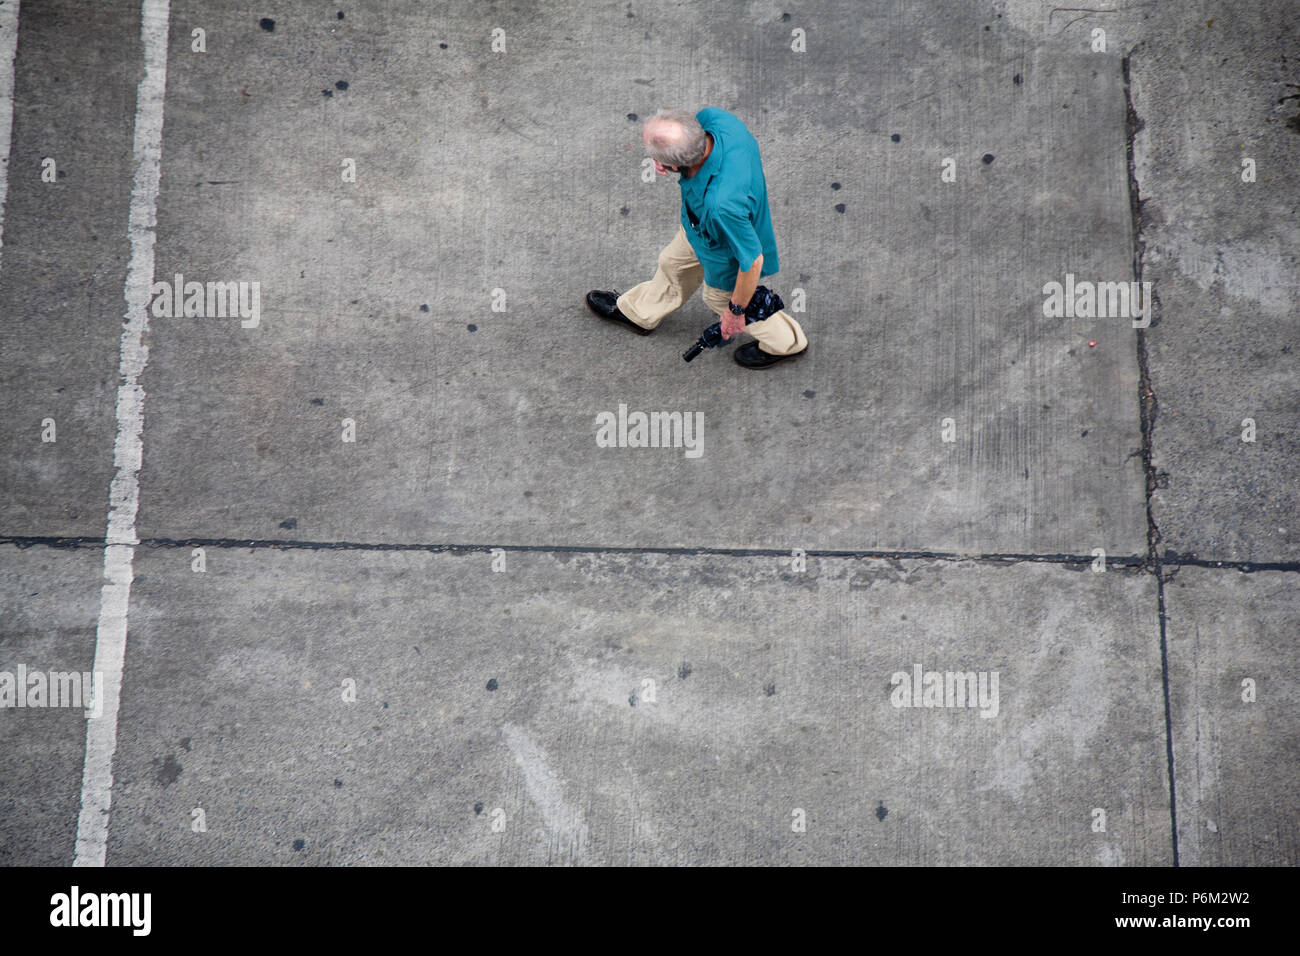 old retired tired person walking up a concrete road, alone, sad, needy Stock Photo